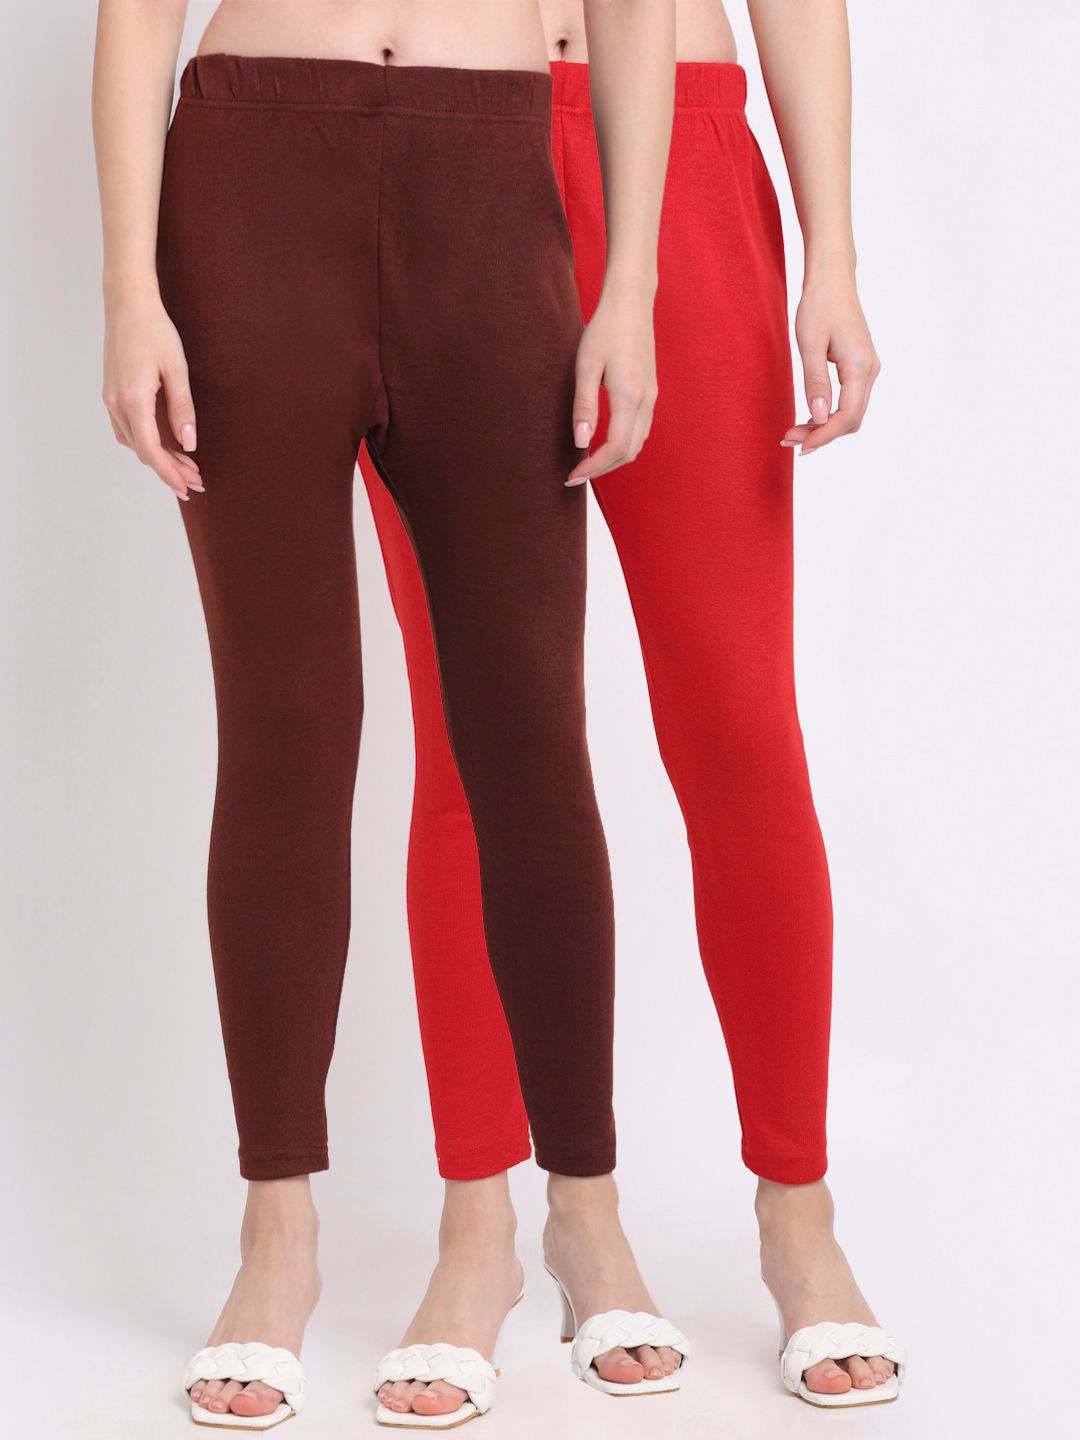 TAG 7 Women Pack Of 2 Red & Burgundy Solid Woolen Ankle Length Leggings Price in India